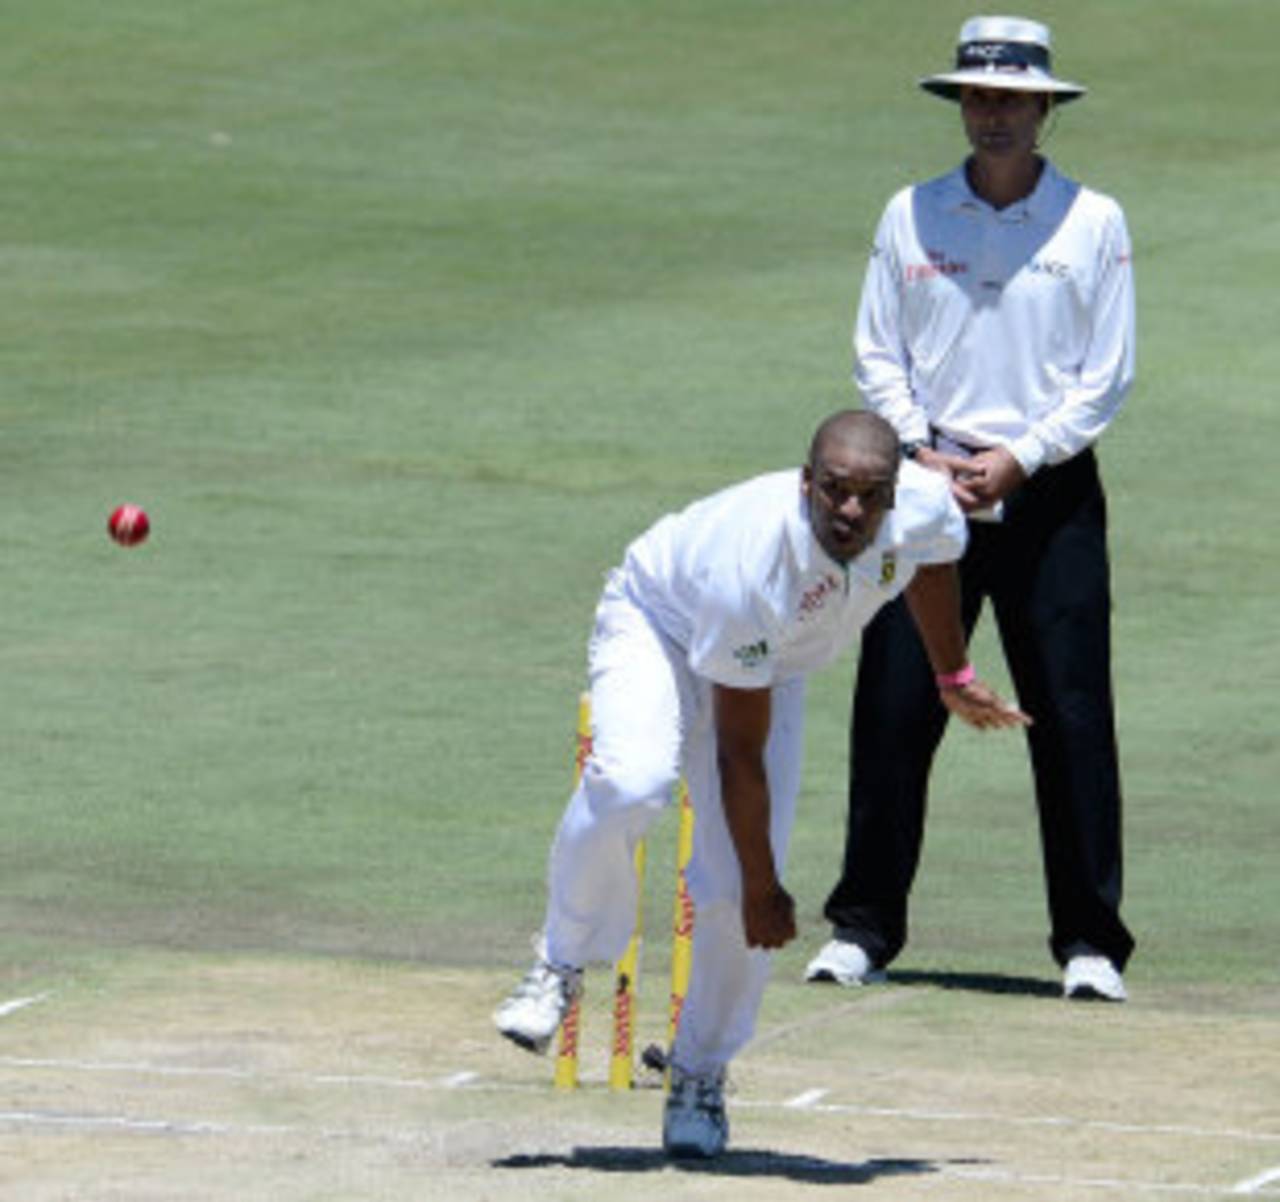 Vernon Philander completes his delivery as umpire Billy Bowden looks on, South Africa v Pakistan, 3rd Test, Centurion, 2nd day, February 23, 2013